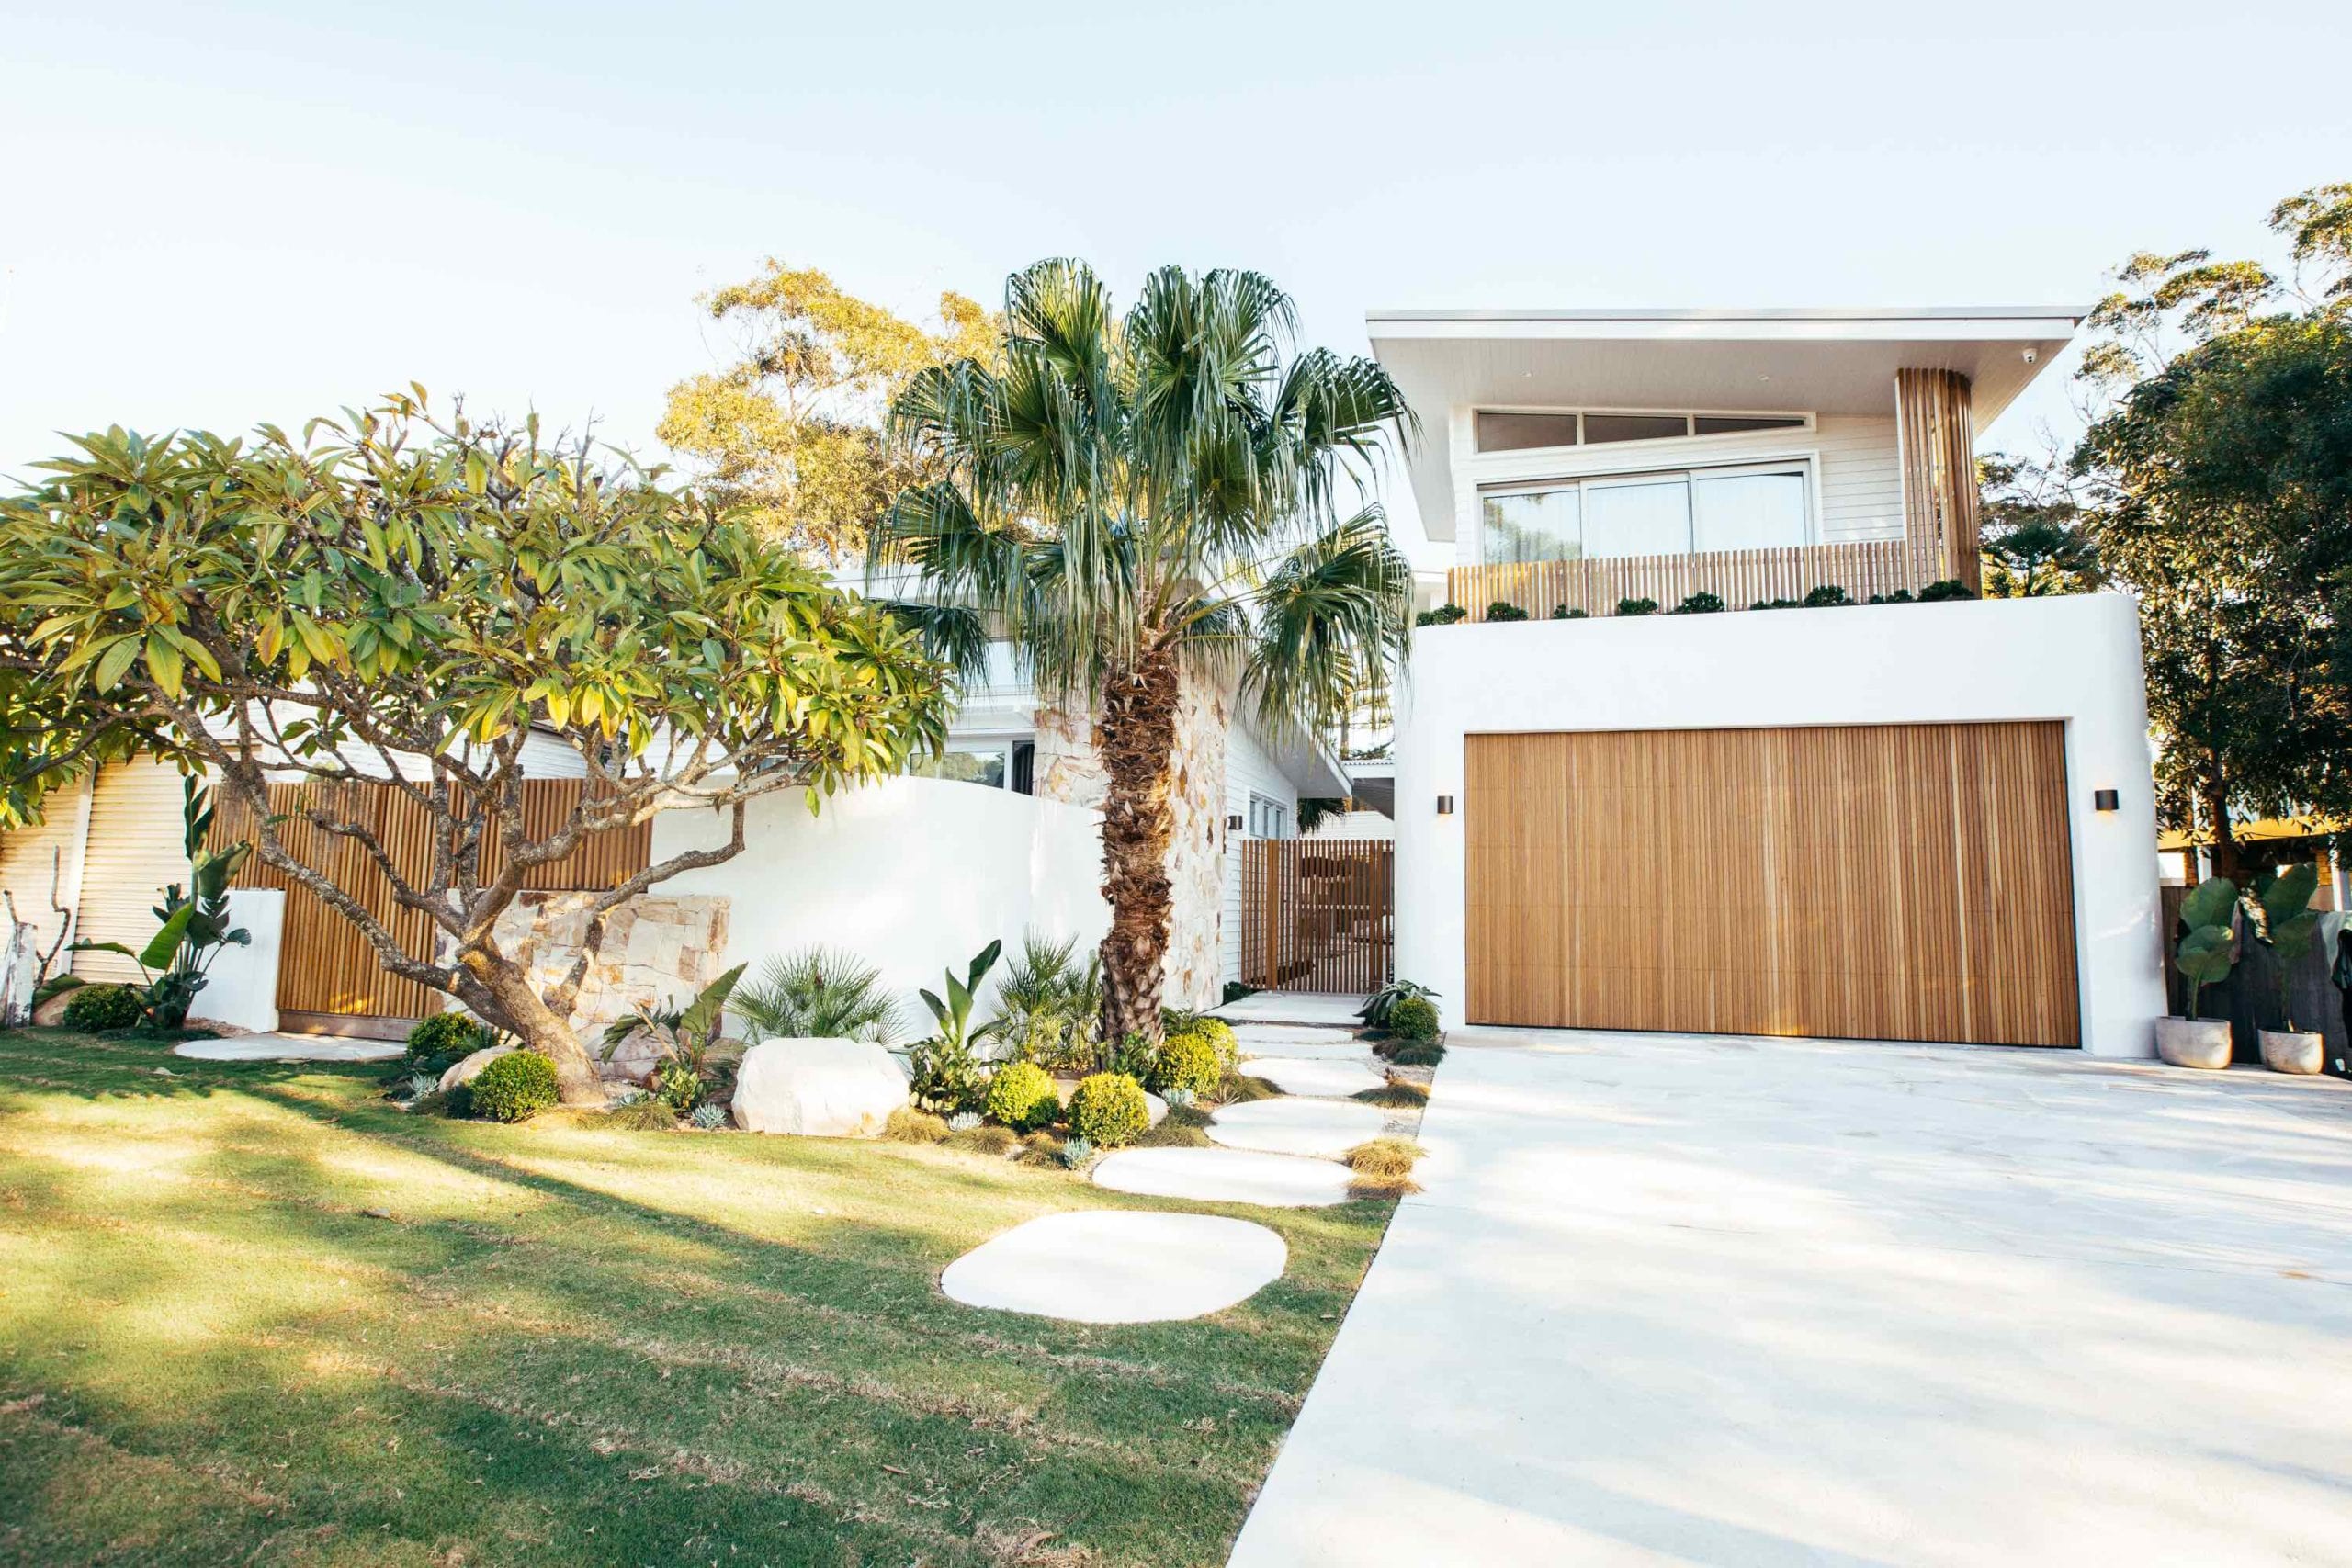 The Blue Lagoon Build is the latest home by Kyal and Kara, located on the central coast of NSW. The home features building material from James Hardie to help achieve the Australian-Mediterranean coastal look.